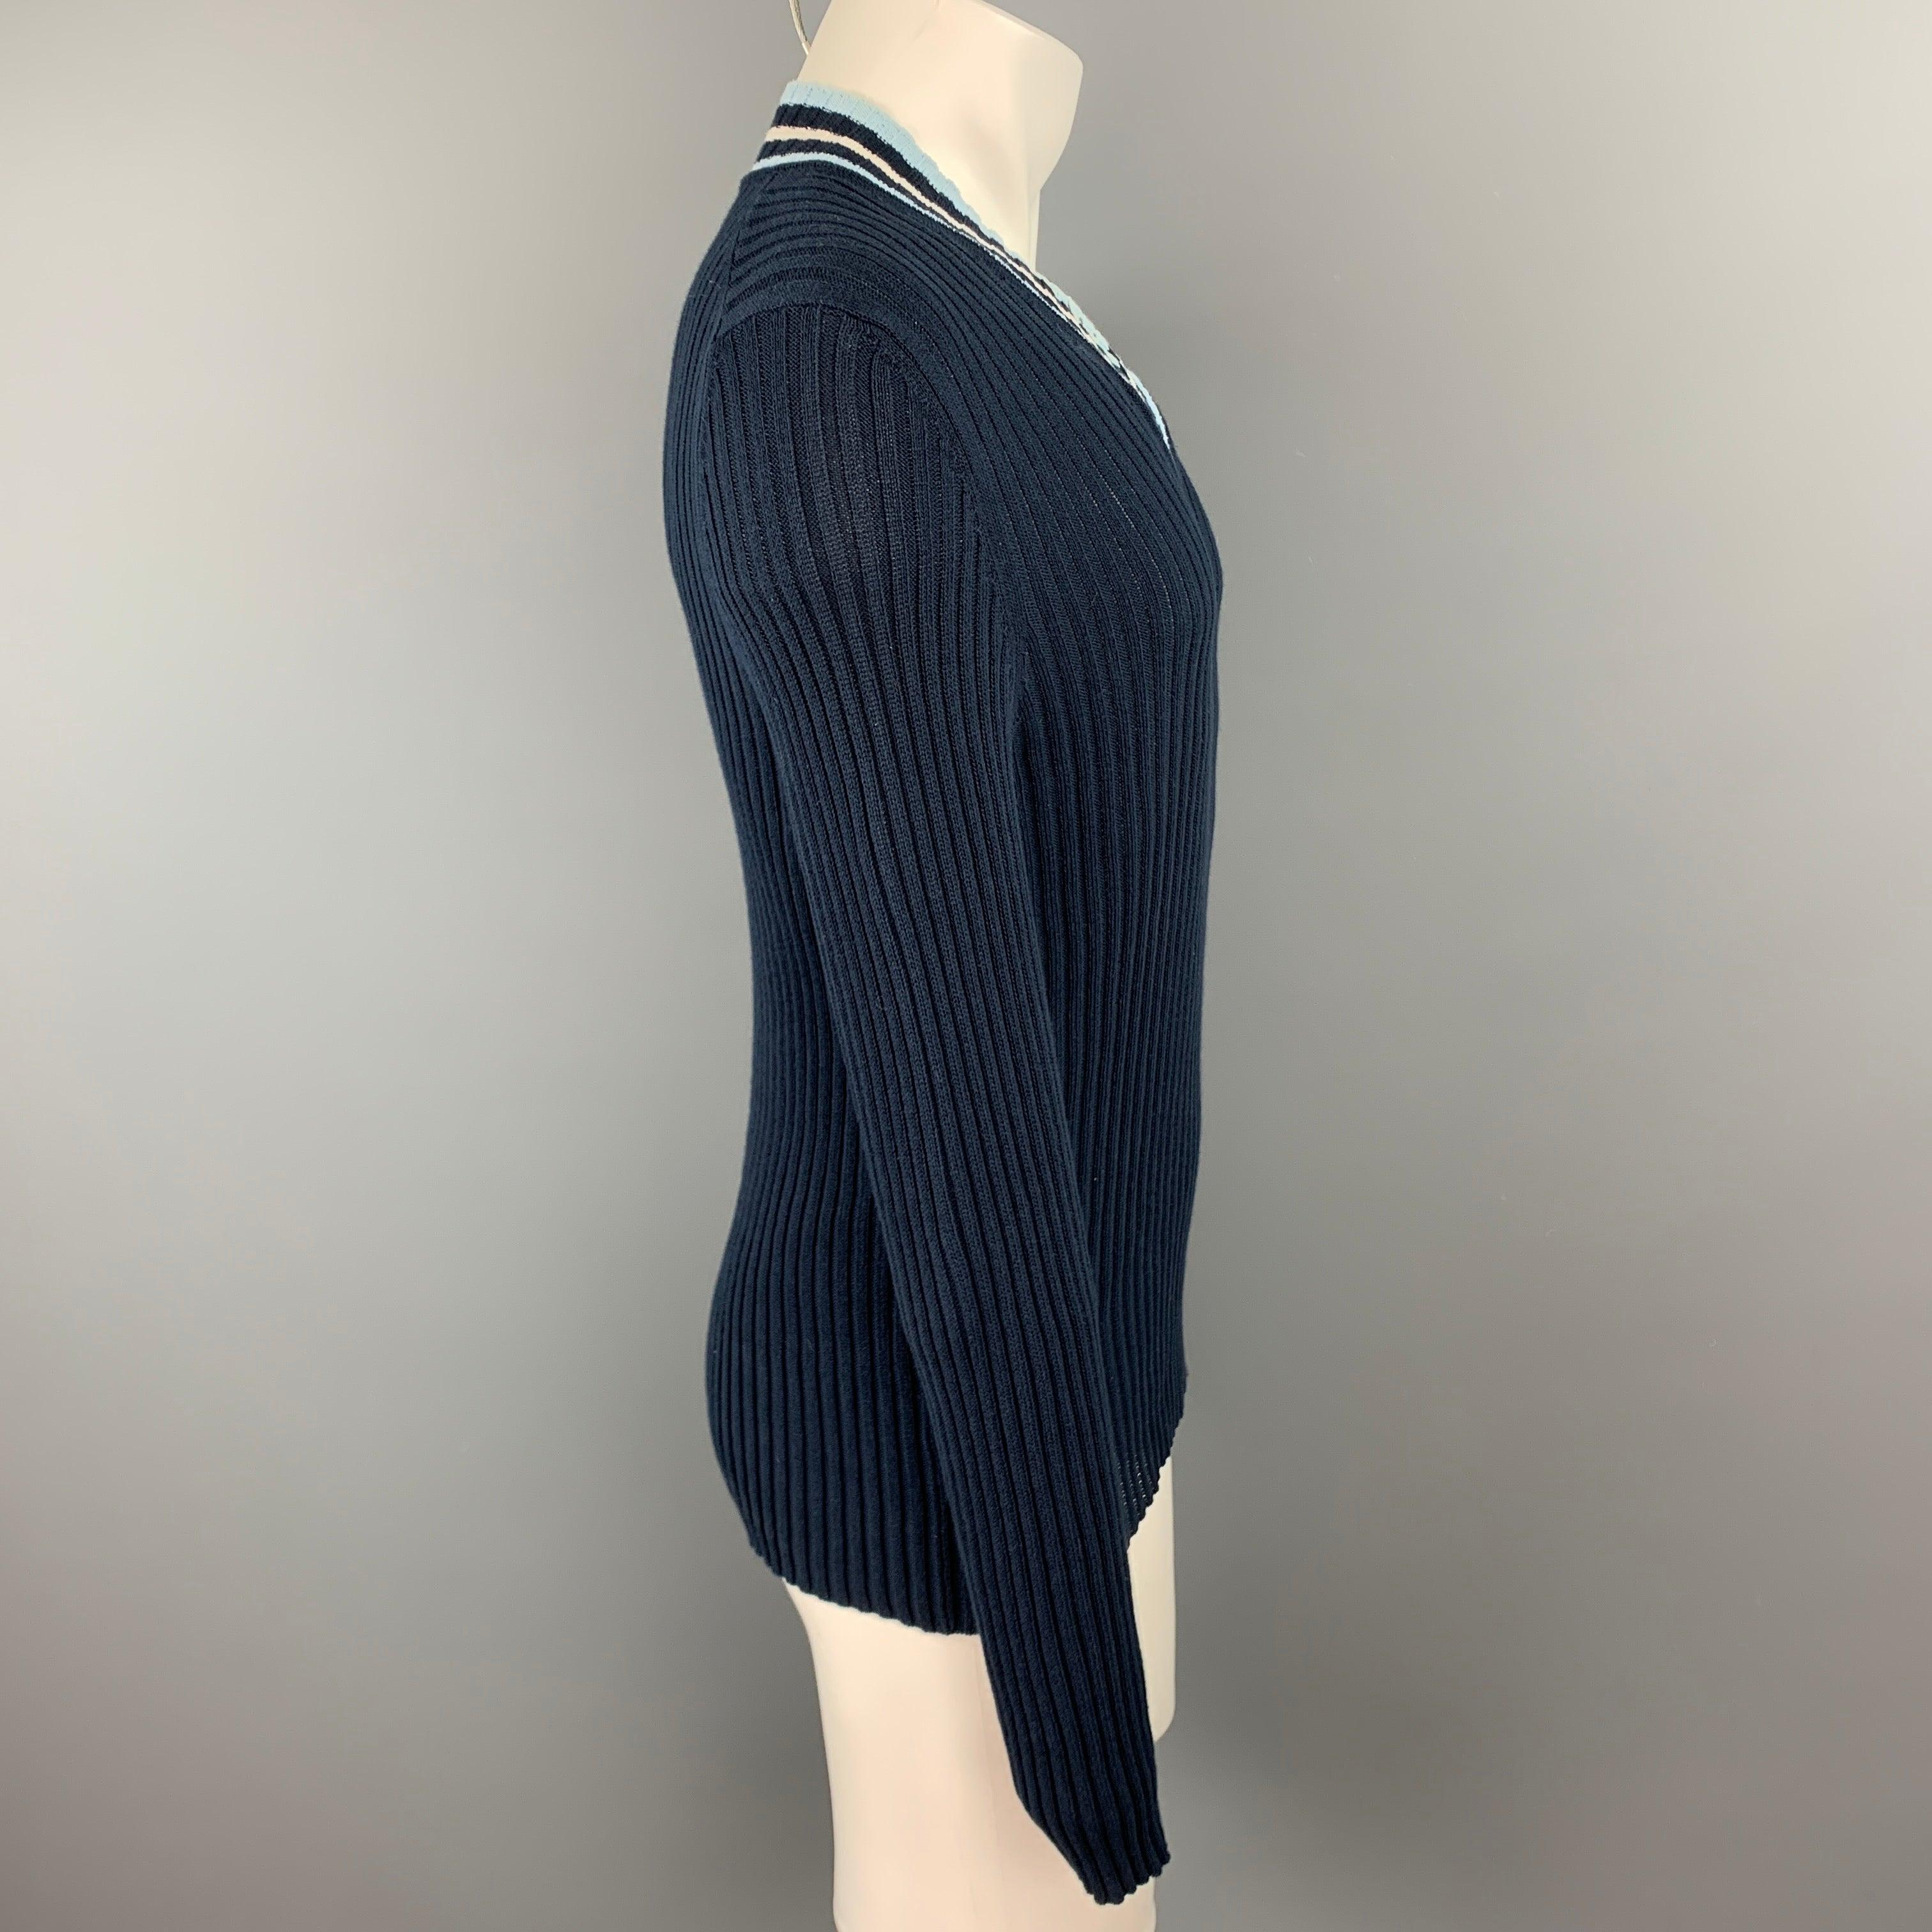 JOHN BARTLETT pullover comes in a navy knitted cotton featuring a slimt fit, striped trim, and a v-neck. Made in Italy.Good
Pre-Owned Condition. 

Marked:   54 

Measurements: 
 
Shoulder: 18 inches 
 Chest: 36 inches  Sleeve: 28.5 inches  Length: